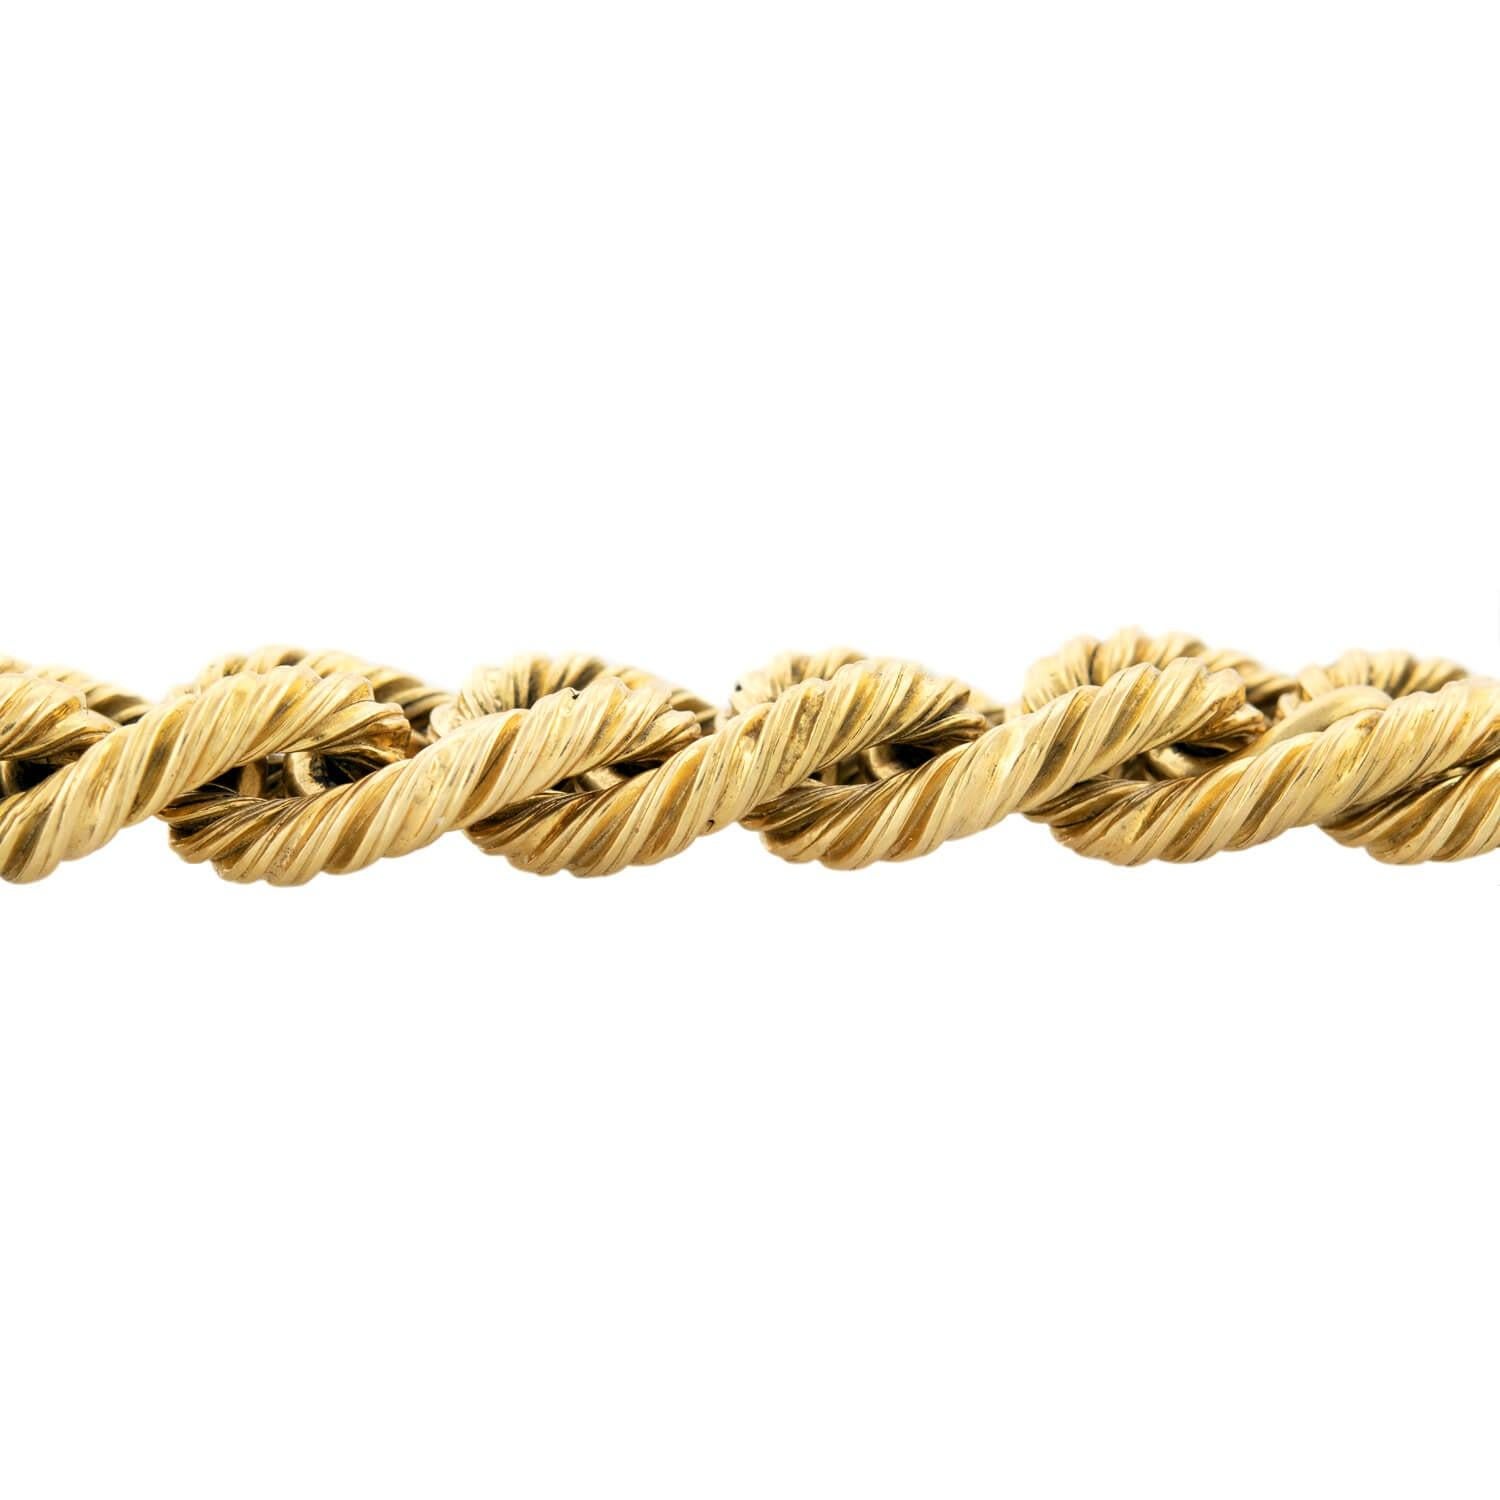 This fabulous Vintage (ca.1960) gold bracelet is a signed piece by Tiffany & Co.! The 18kt gold bracelet is comprised of heavy twisted curb links held close together by smaller, smooth curb links, forming a stylish statement piece that wraps around